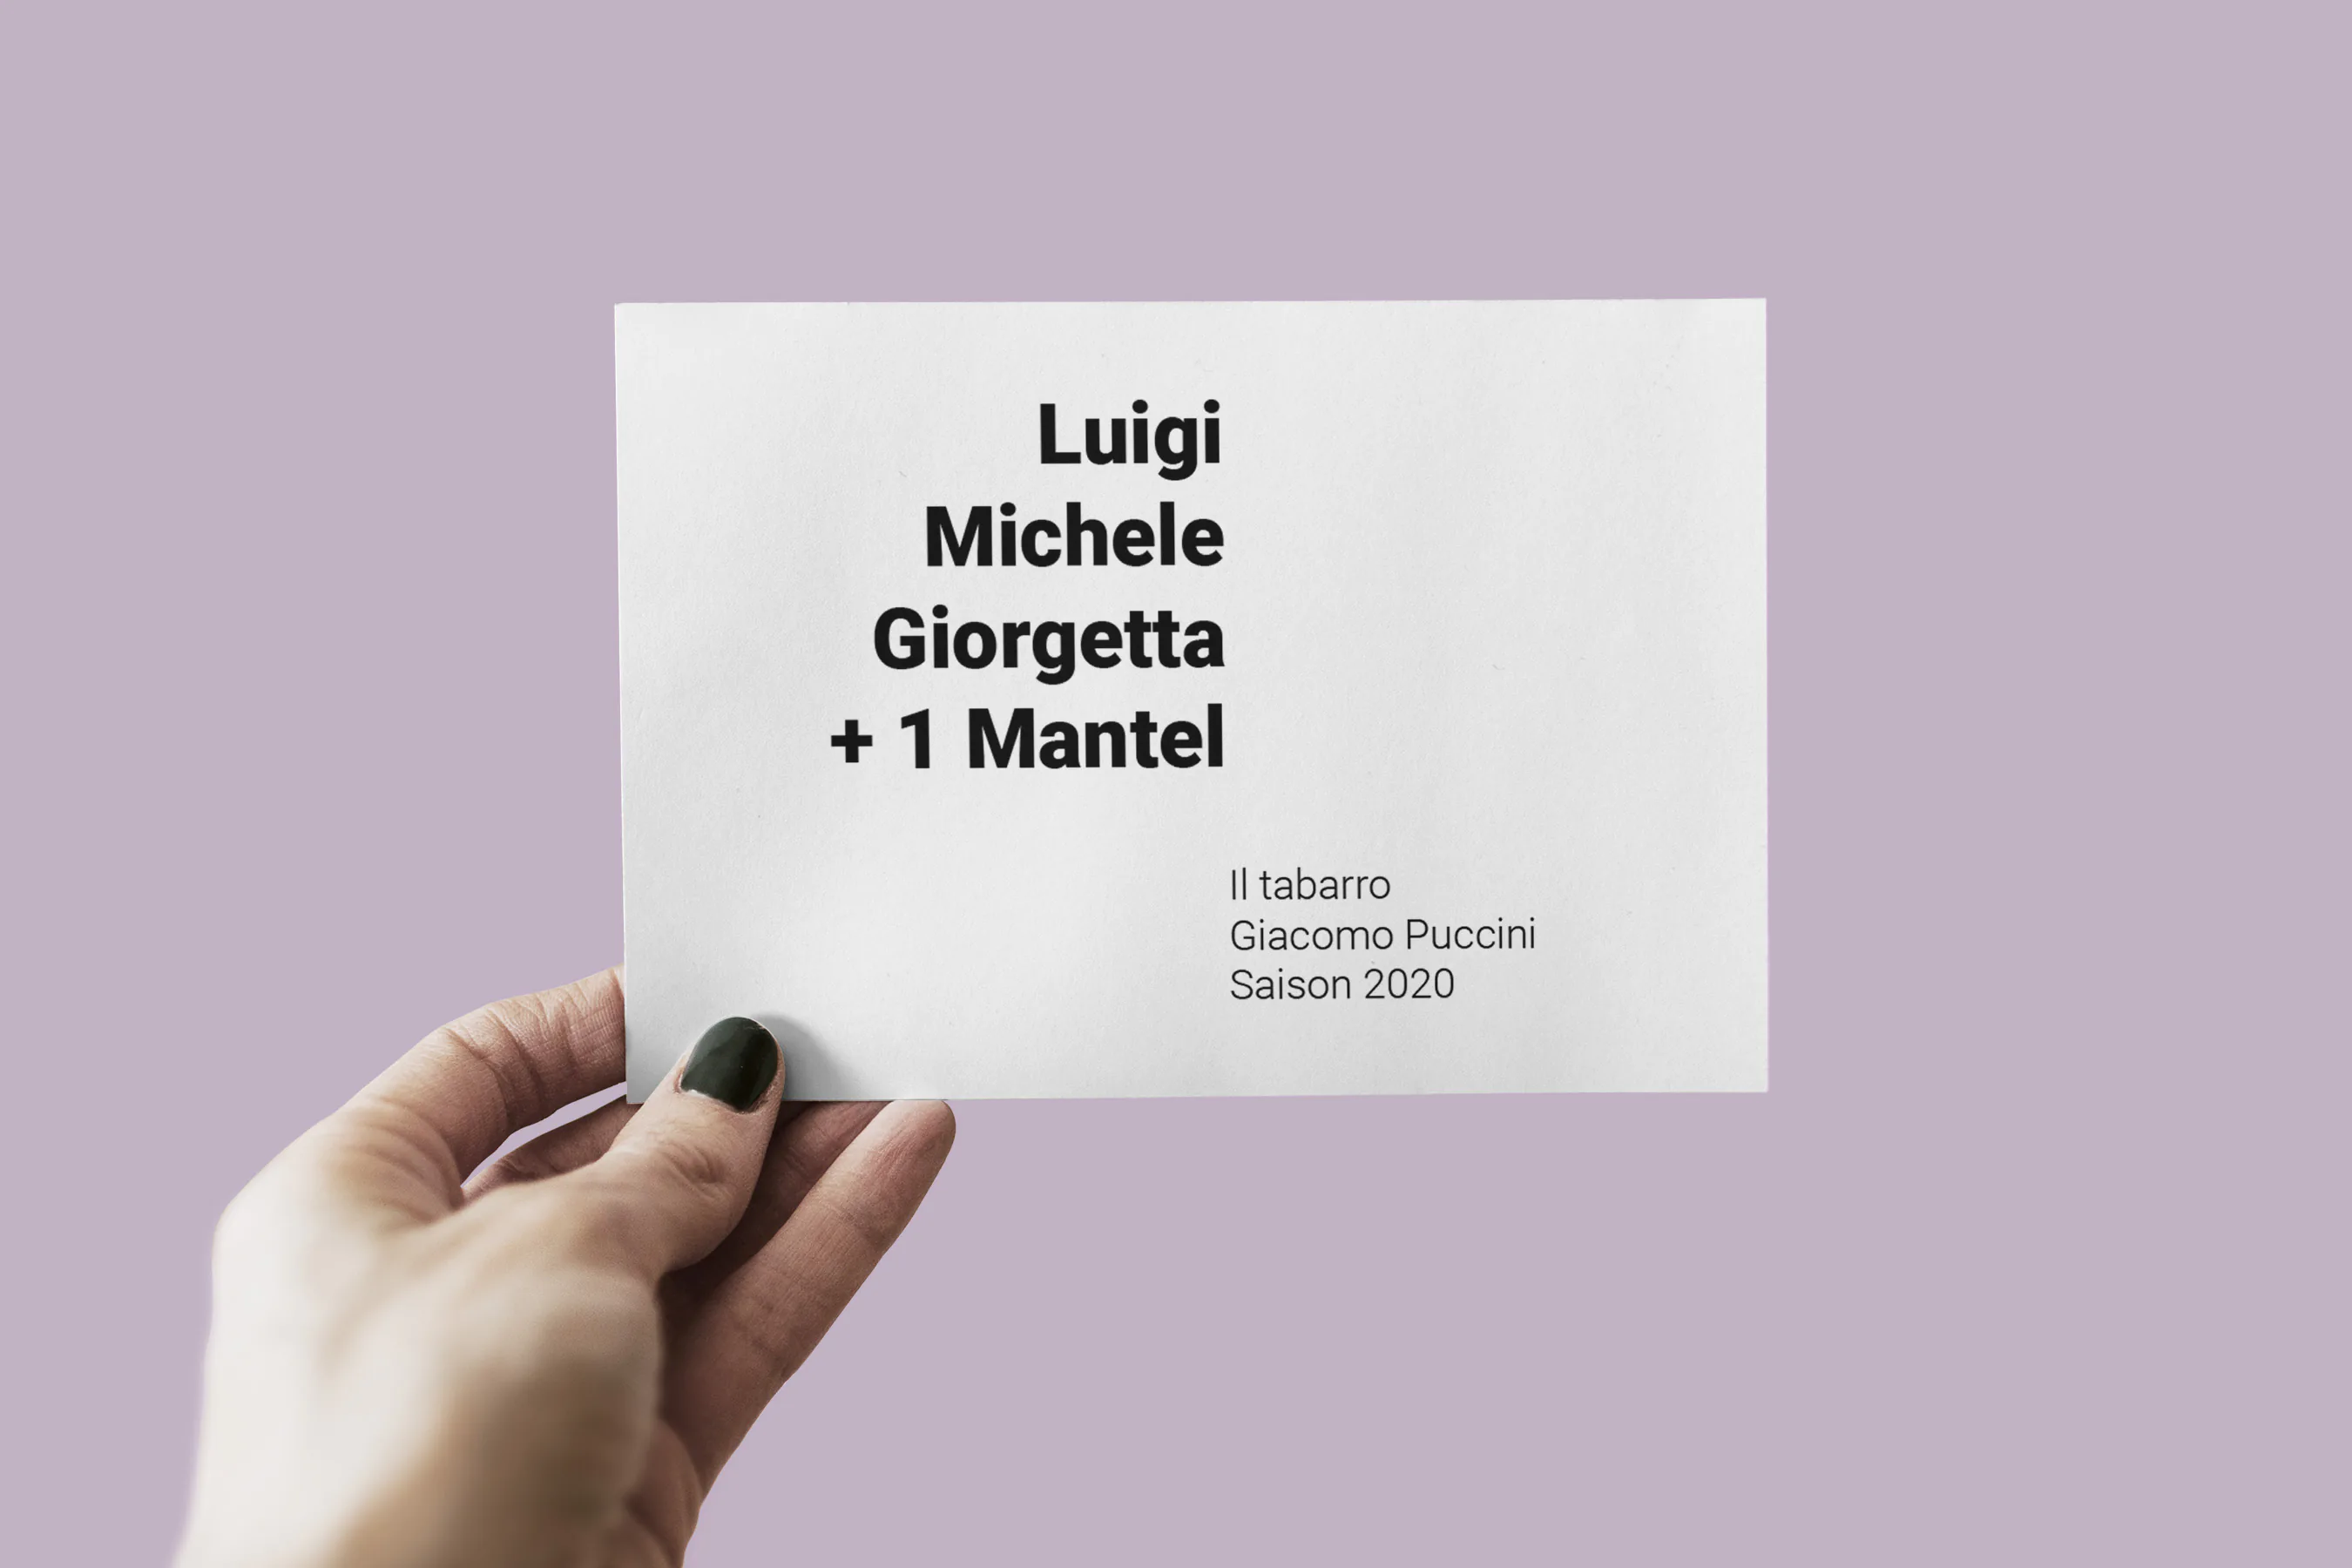 Another Postcard for an opera production of Giacomo Puccini’s Il Tabarro by Junge Mitteldeutsche Kammeroper e.V. (jmko) that says Luigi, Michele, Giorgetta + 1 Mantel (one Coat) in order to hint at the operas subjects